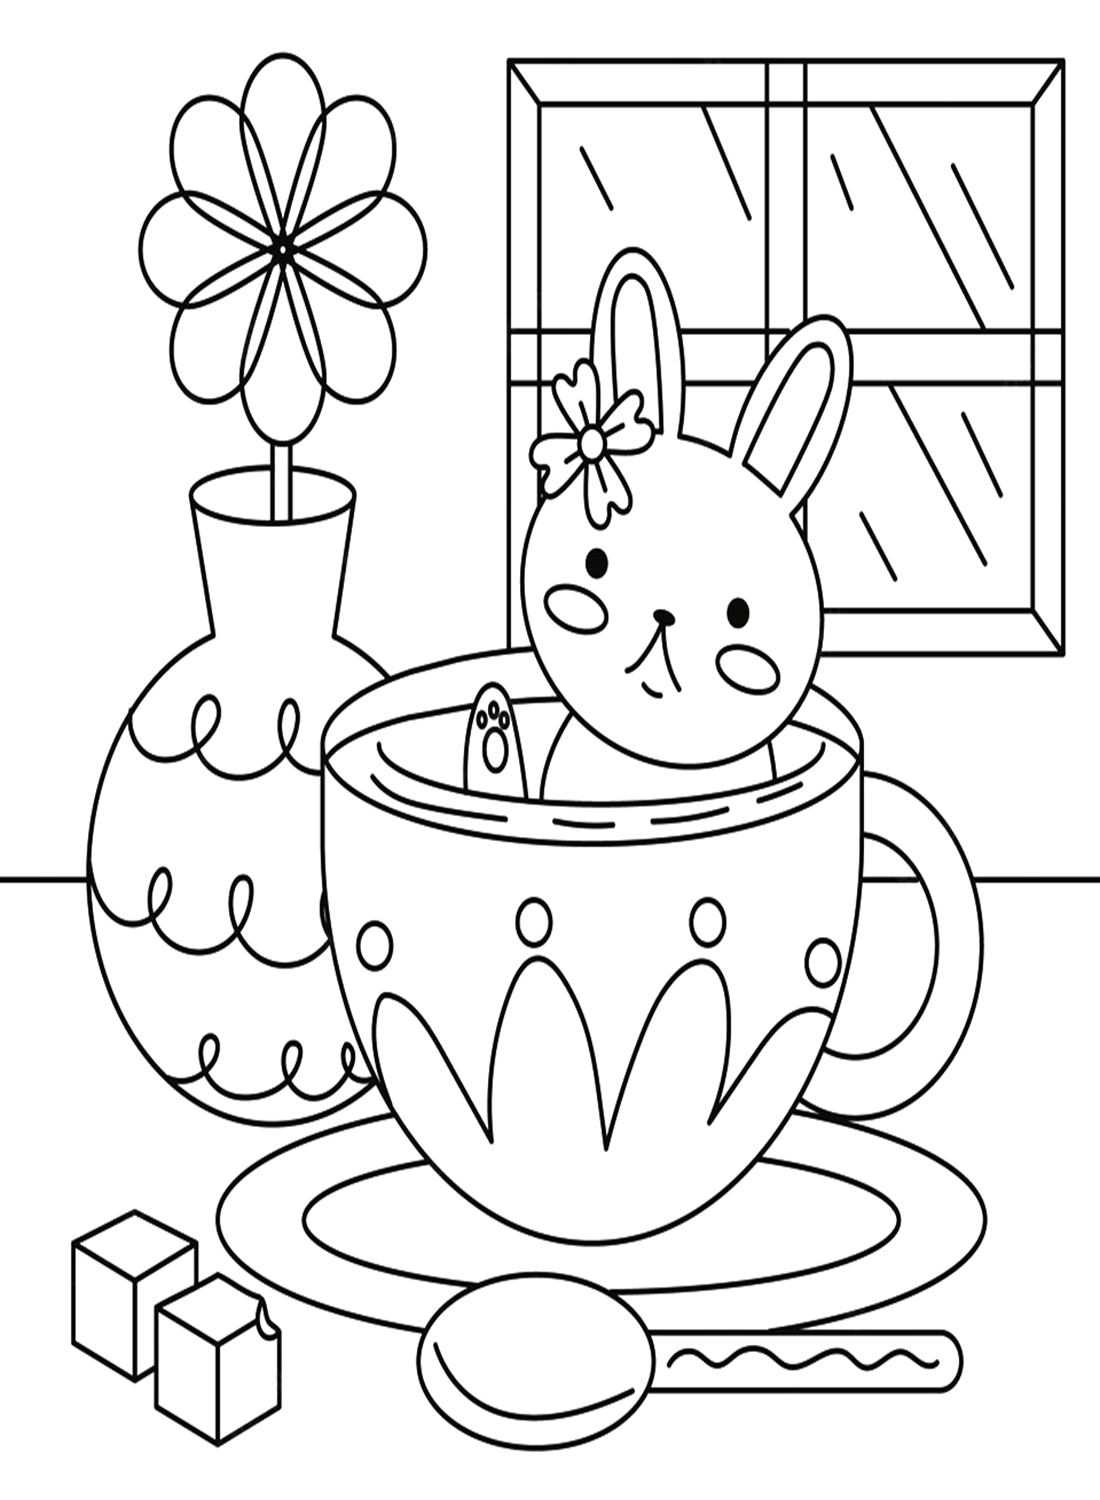 Rabbit In A Cup from Rabbit